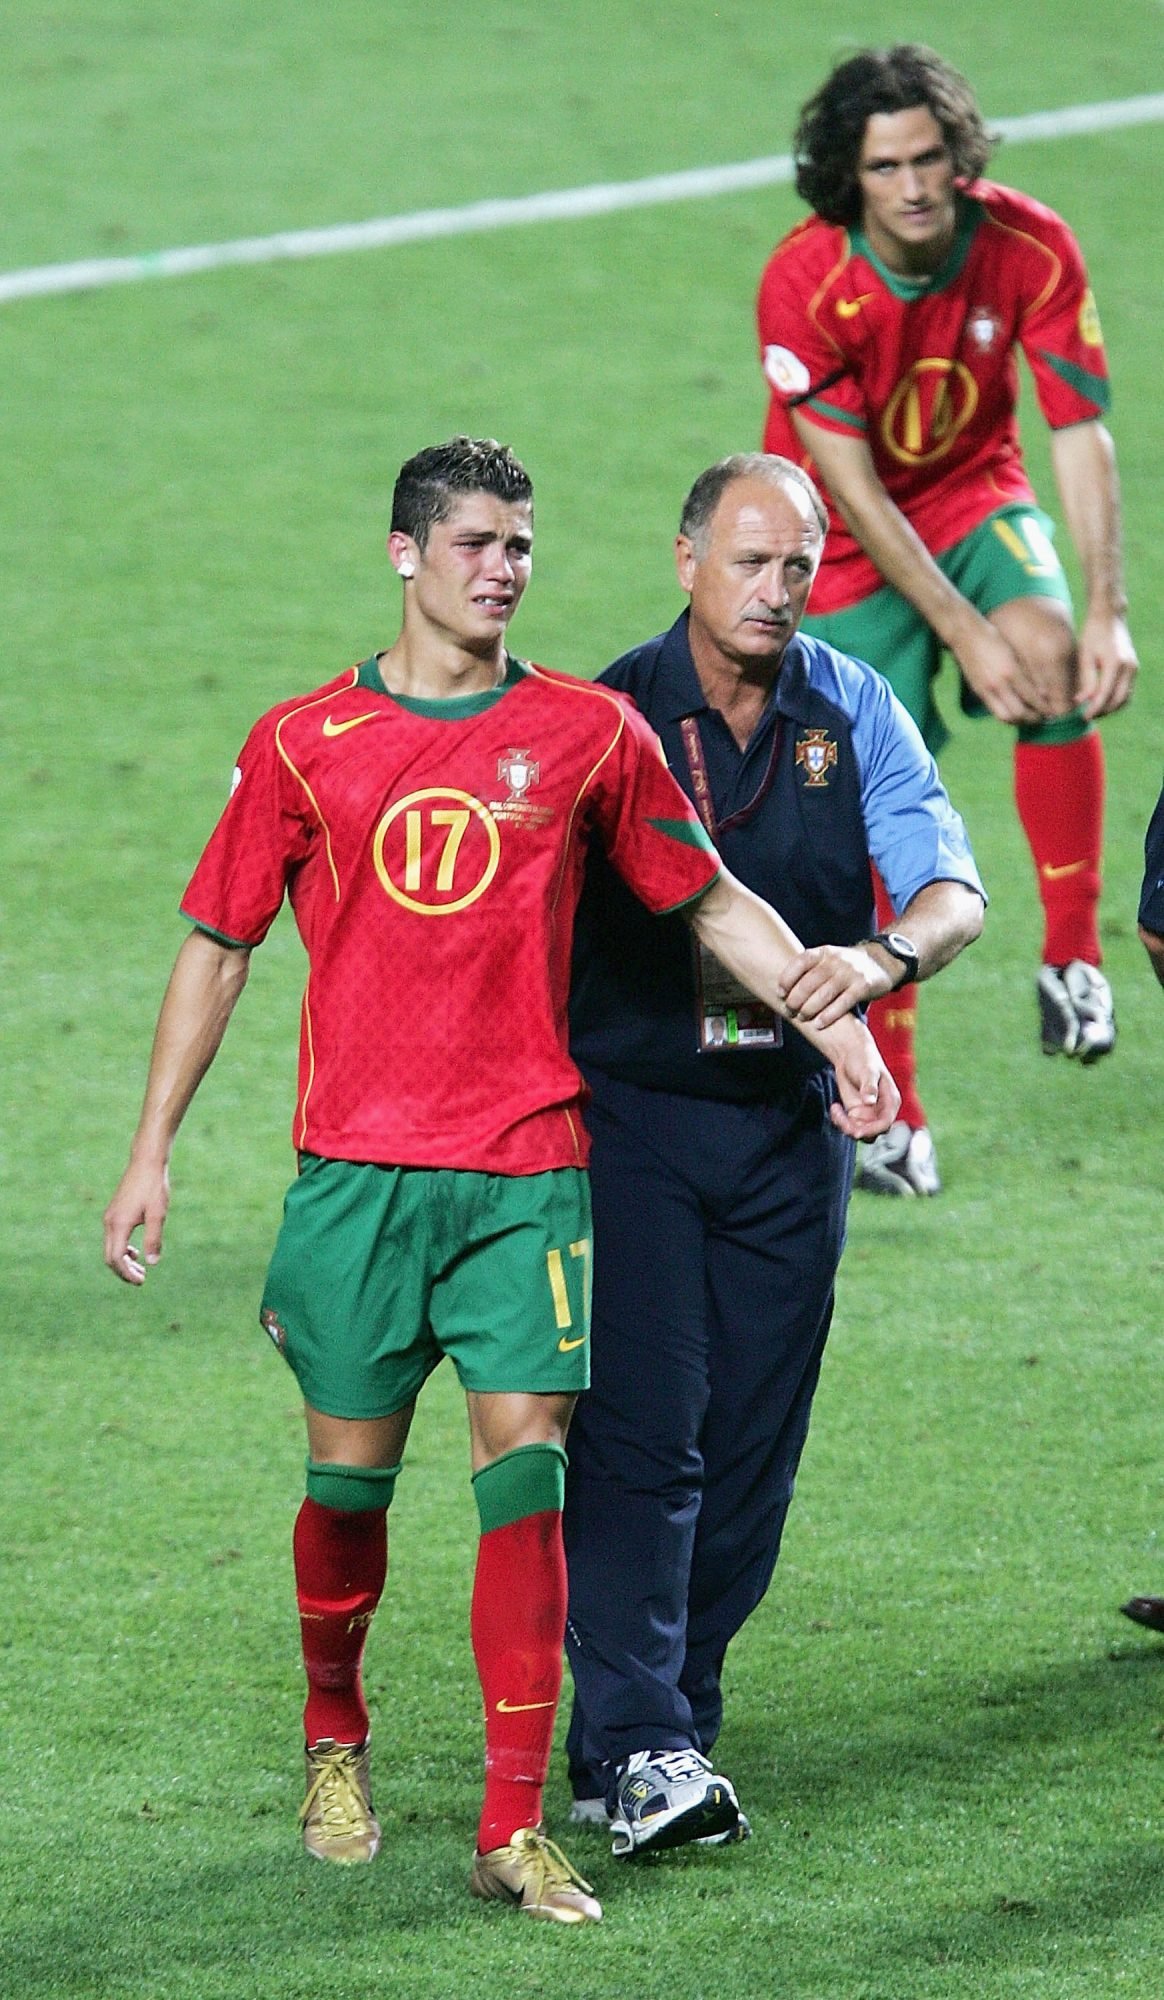 LISBON, PORTUGAL - JULY 4: Cristiano Ronaldo of Portugal in tears with coach Luiz Felipe Scolari after the UEFA Euro 2004, Final match between Portugal and Greece at the Luz Stadium on July 4, 2004 in Lisbon, Portugal. (Photo by Laurence Griffiths/Getty Images)